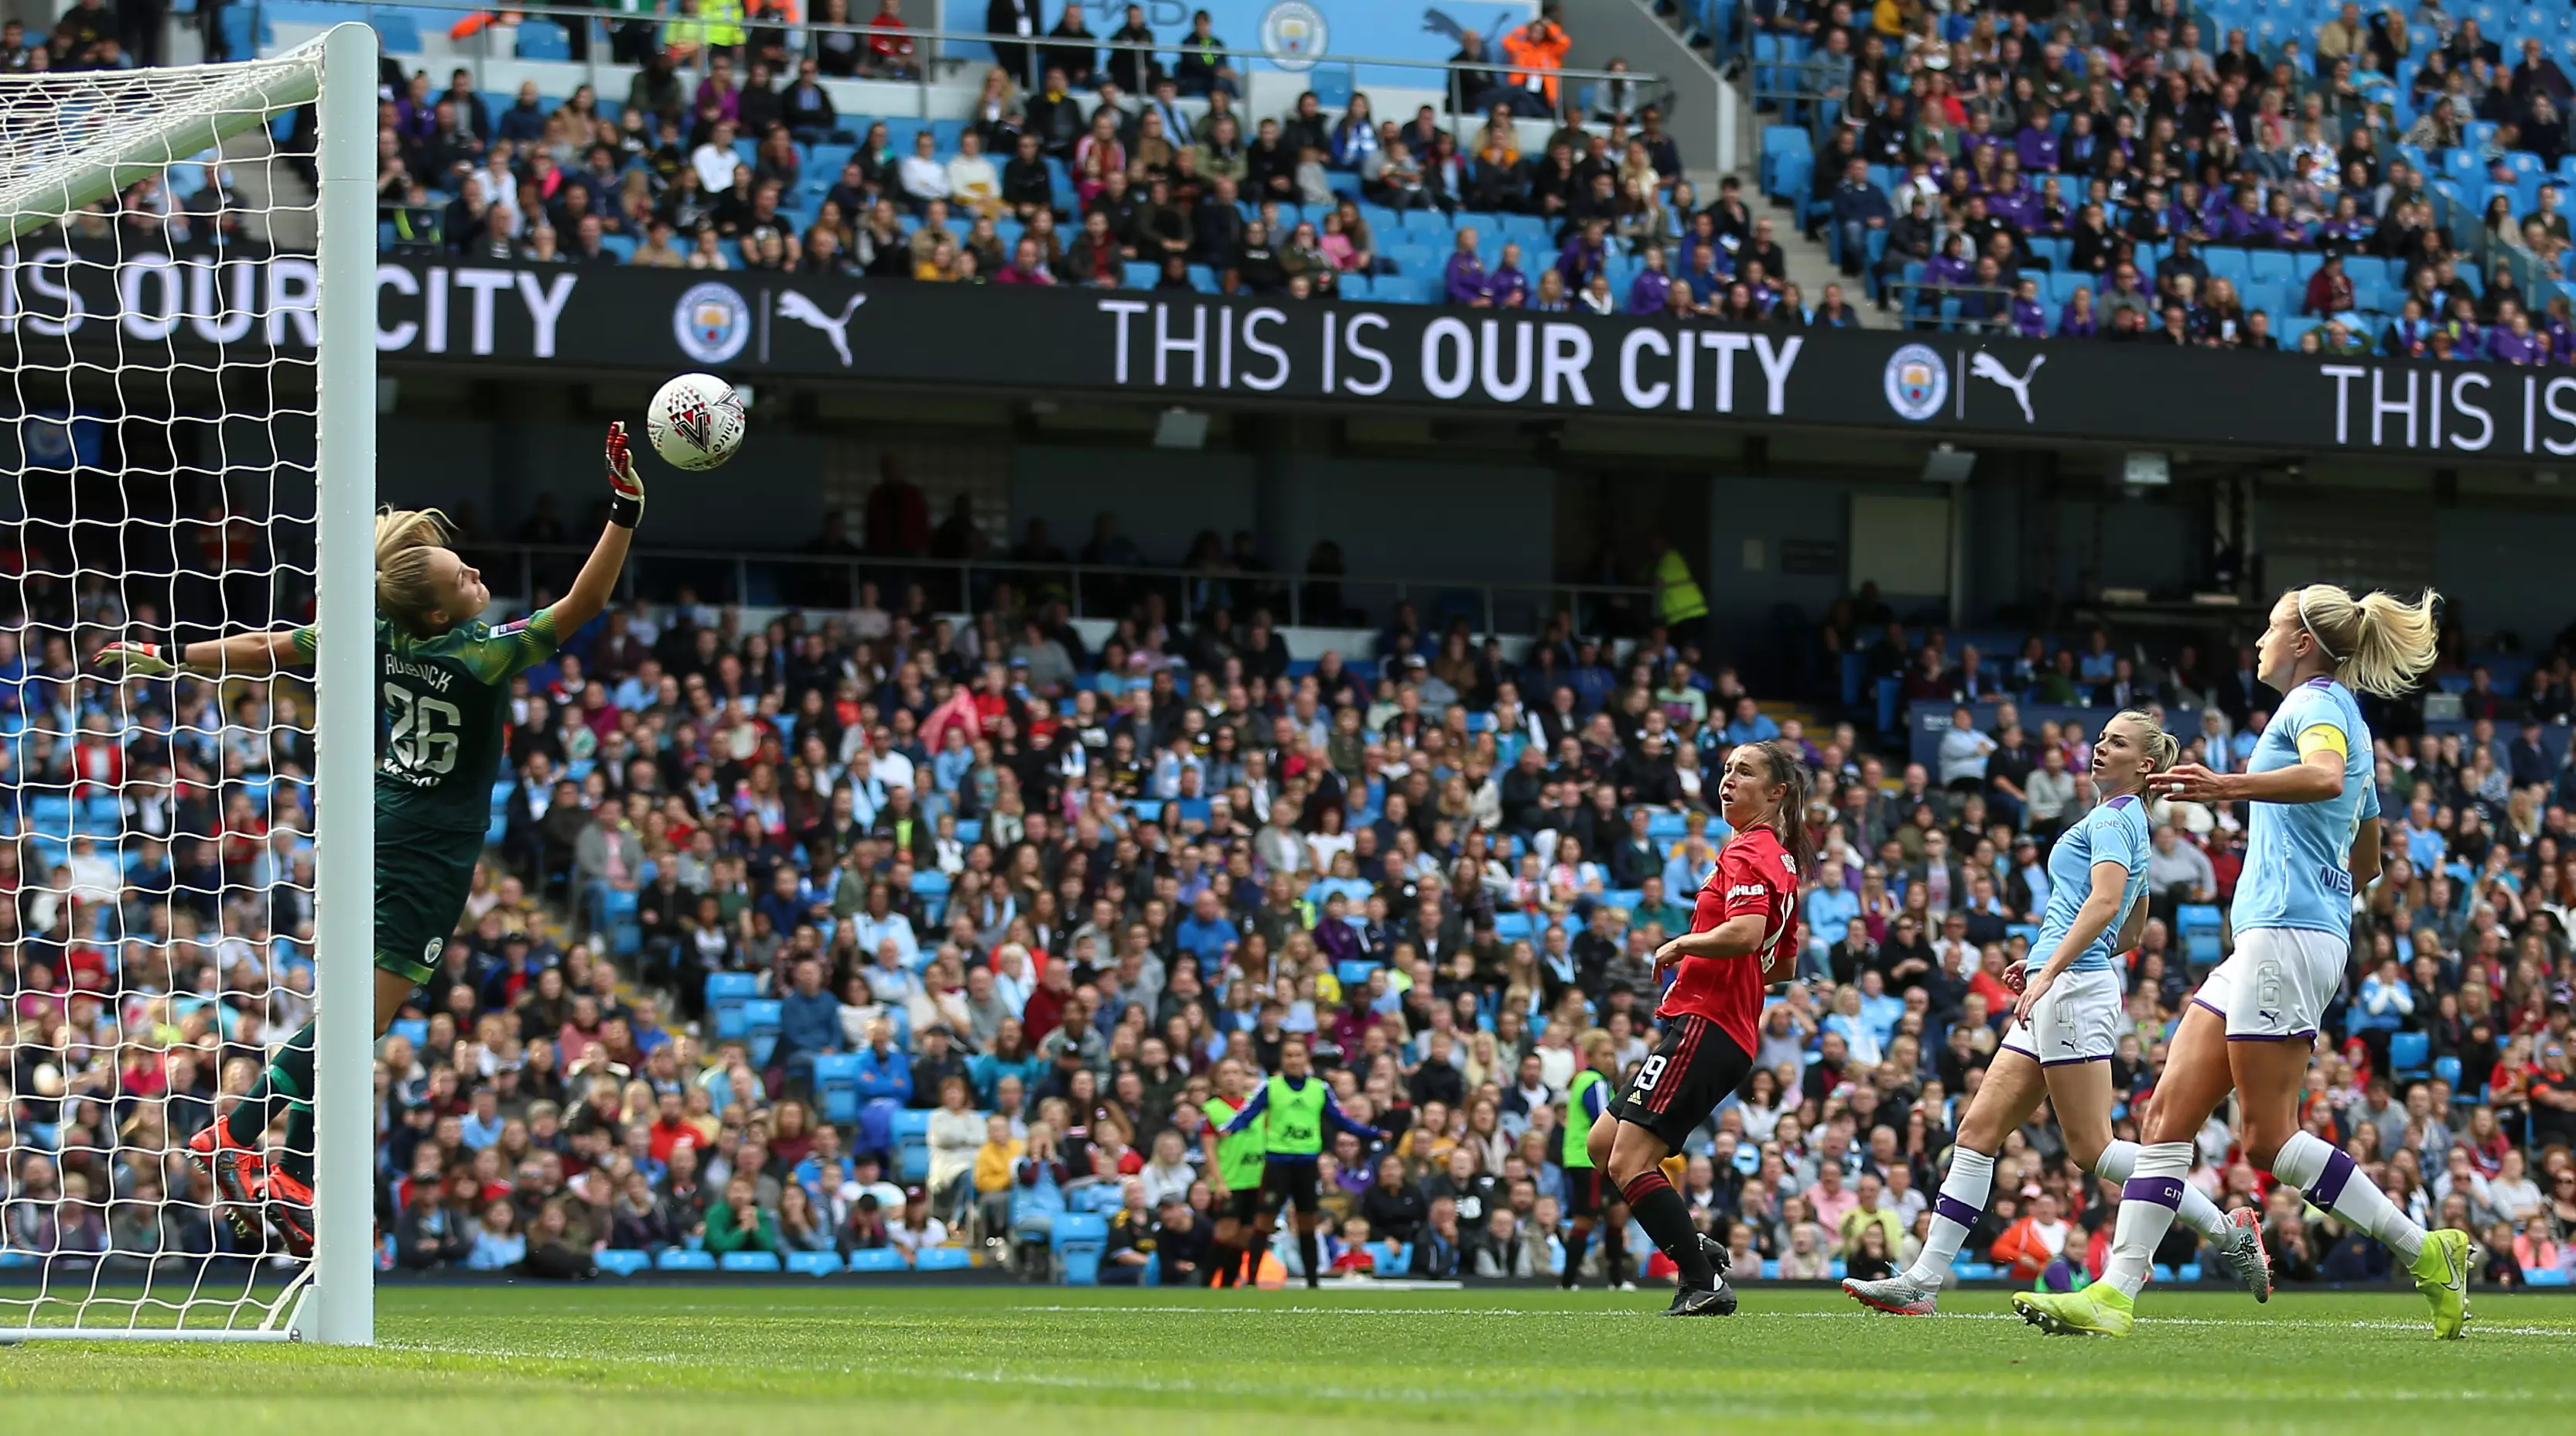 More than 31,000 watched City vs United. Image: PA Images